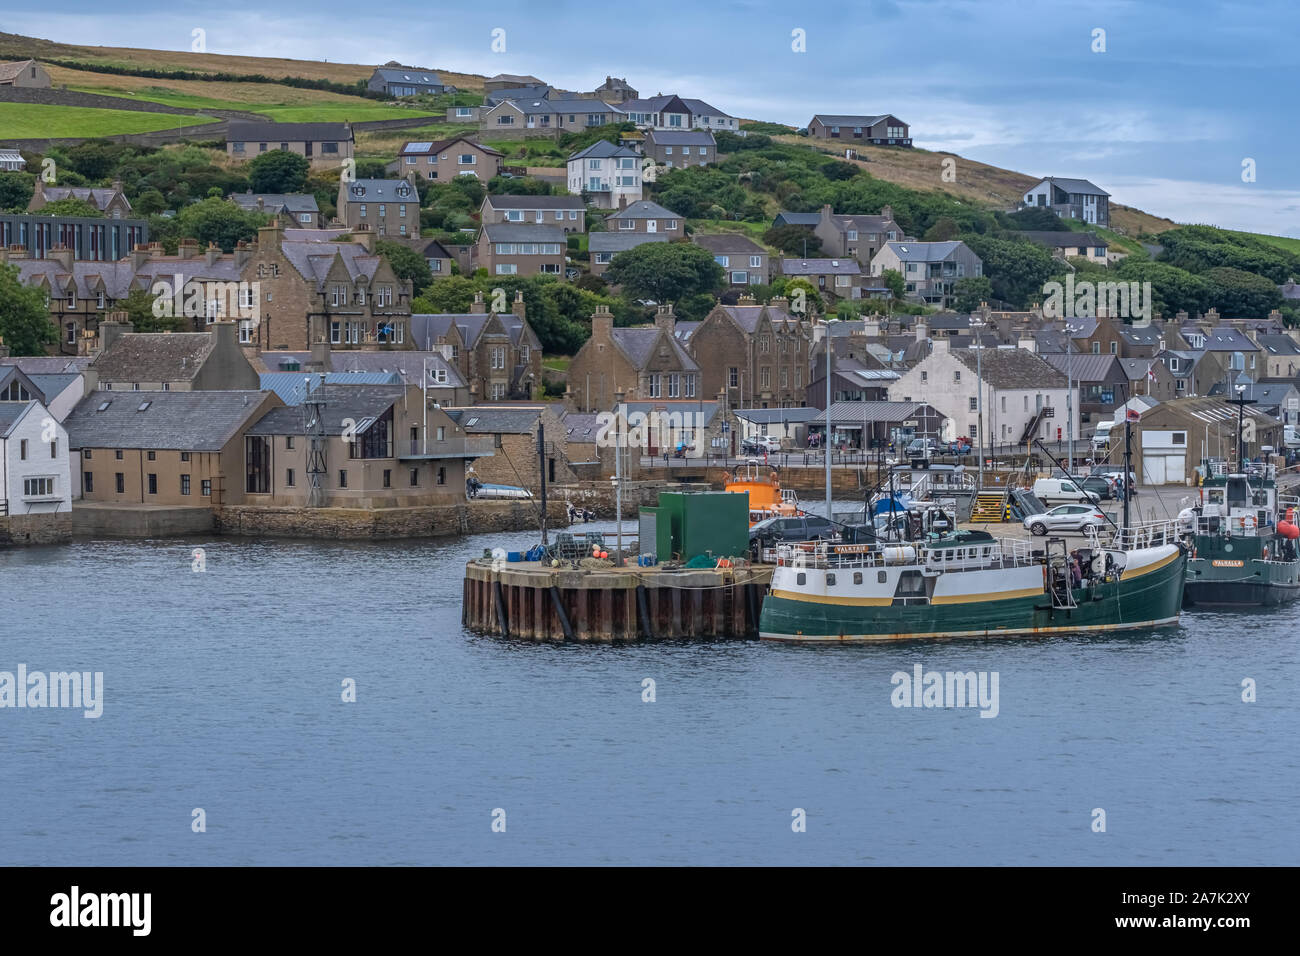 Stromness locally, the second-most populous town in Orkney, Scotland. Stock Photo